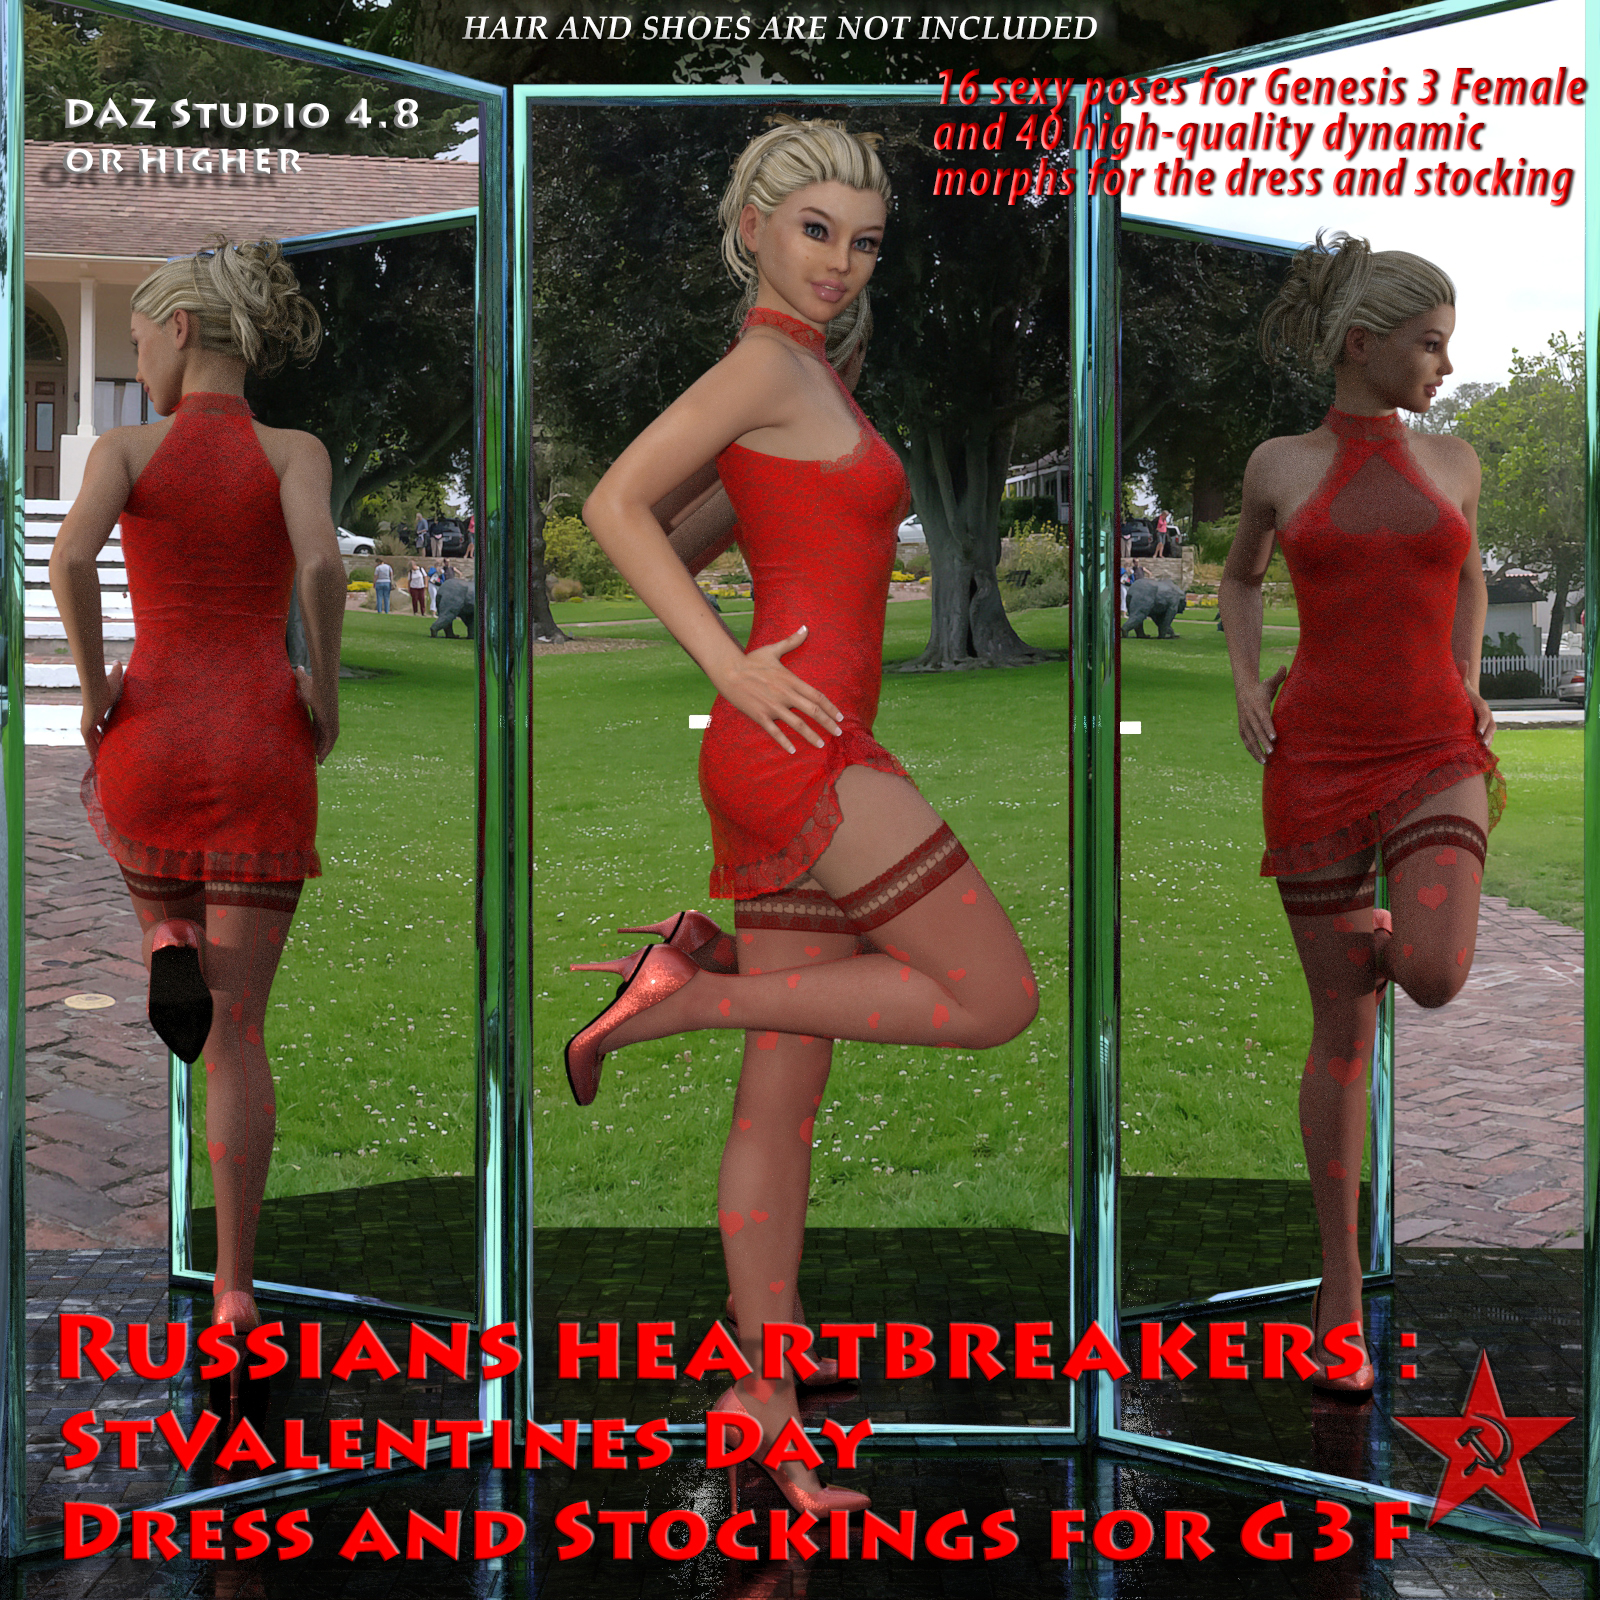 Russians heartbreakers: StValentines Day - Dress and Stockings for G3F